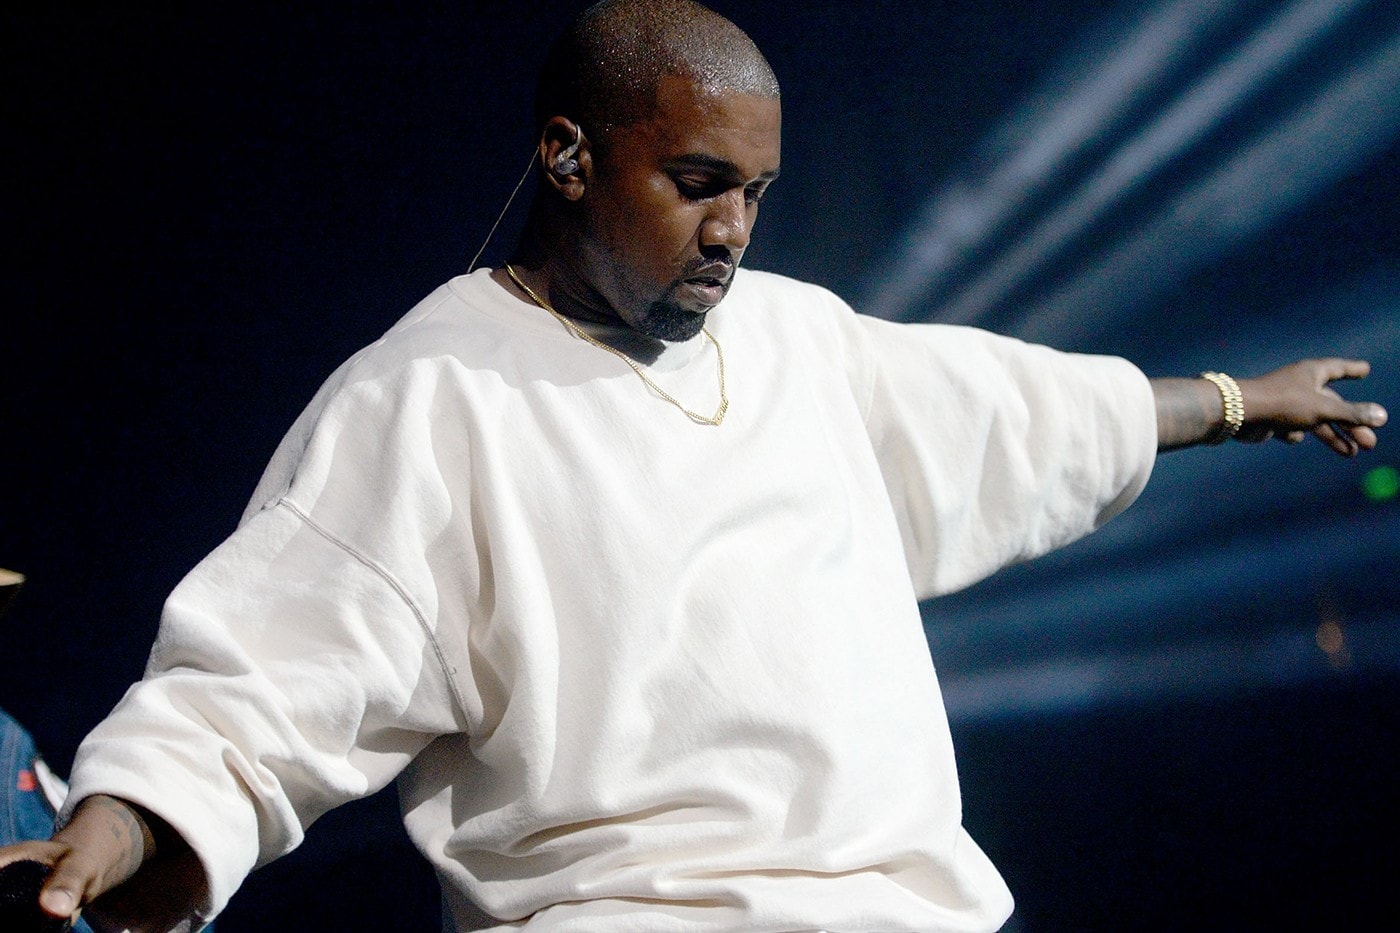 kanye west Tells Fans do Not Ask Me to Do an NFT